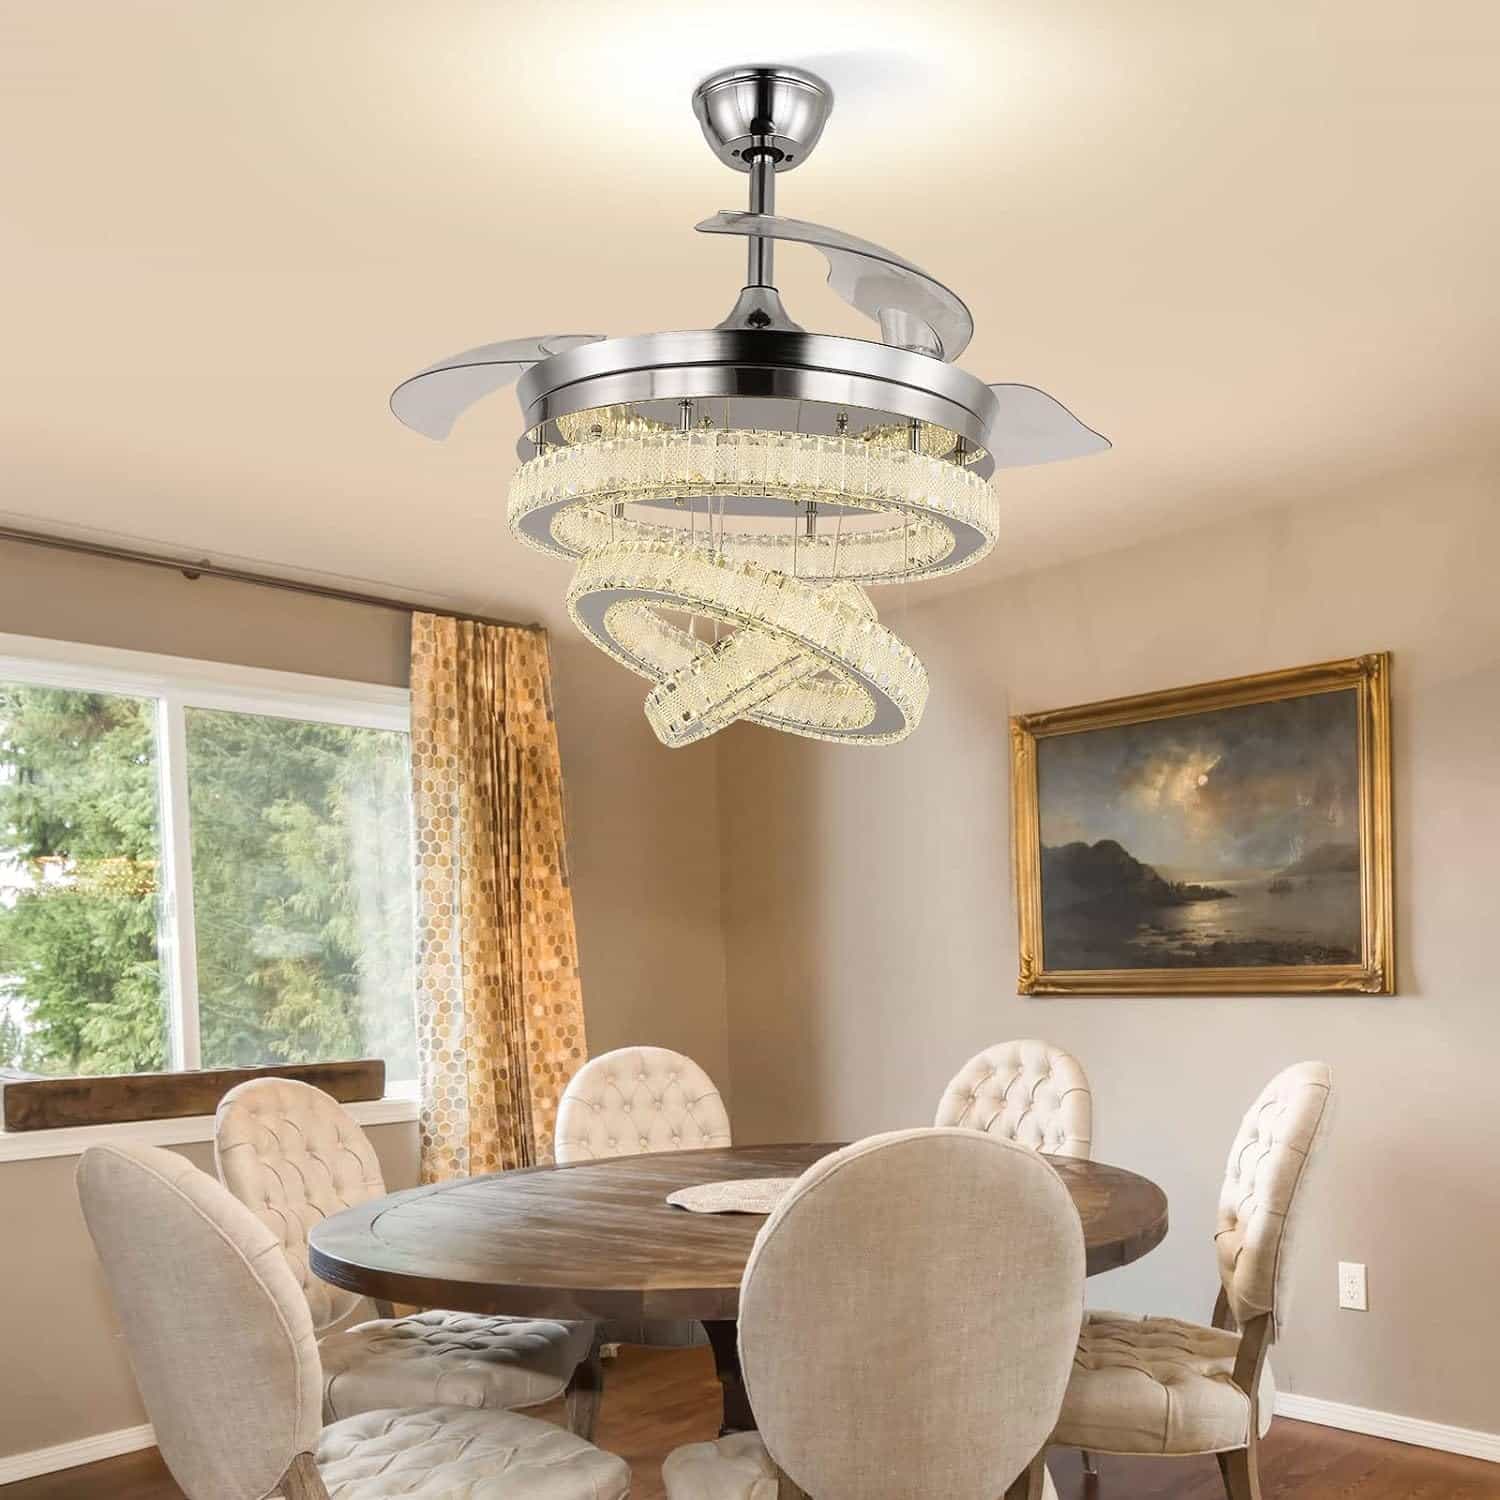 FRIXCHUR 42 Gold Modern Crystal Ceiling Fan with Lights Dimmable Fandelier Retractable Crystal Chandelier Ceiling Fan for Bedroom Dining Room,6 Speed,3 Light Colors Adjustable